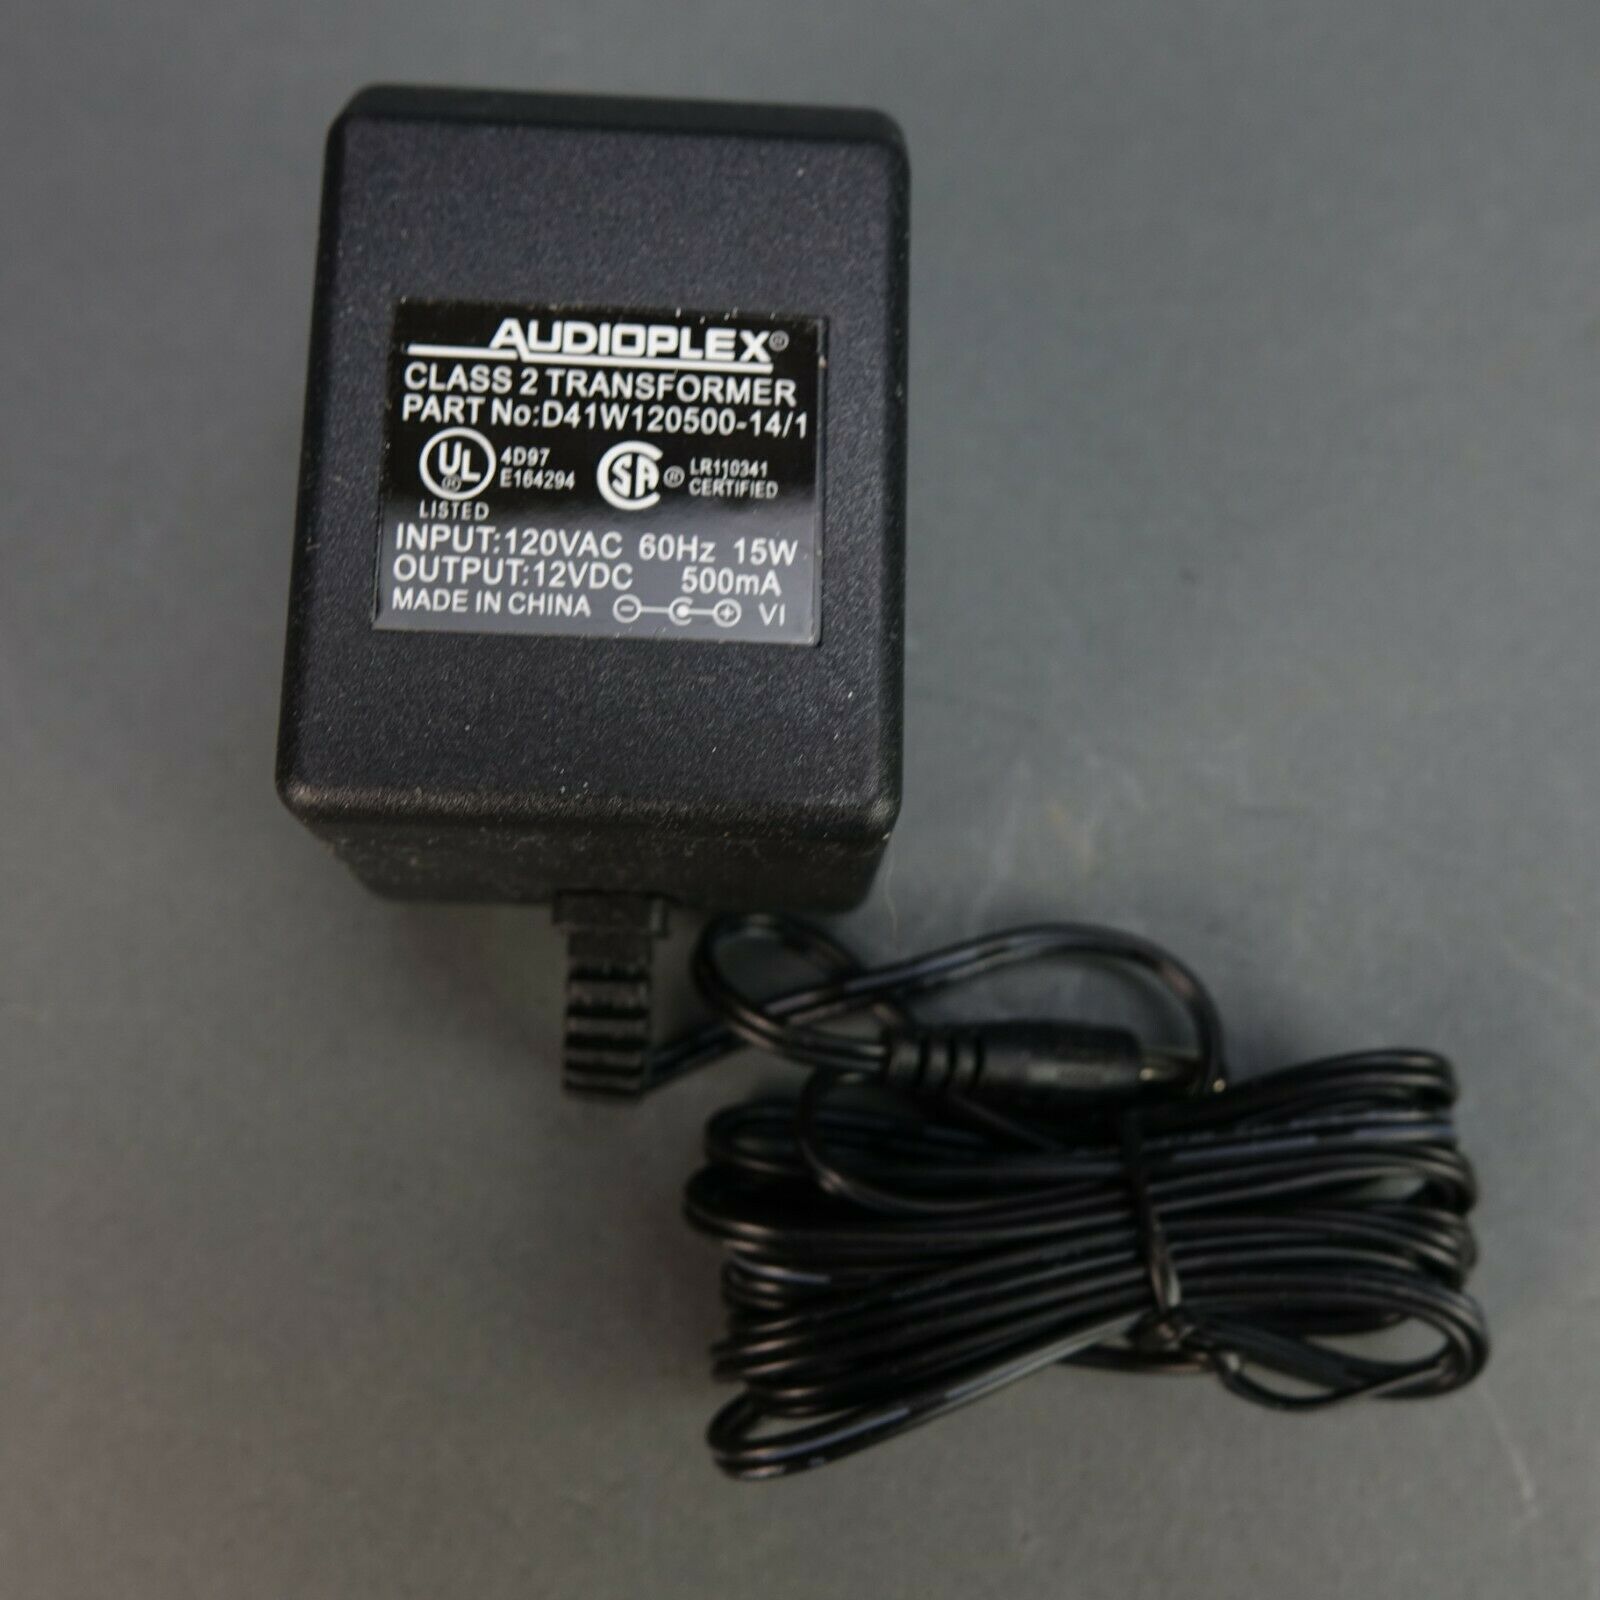 Audioplex D41W120500-12/1 AC DC Power Supply Adapter Charger Output 12V 500mA Connection Split/Duplication: 1:1 Type